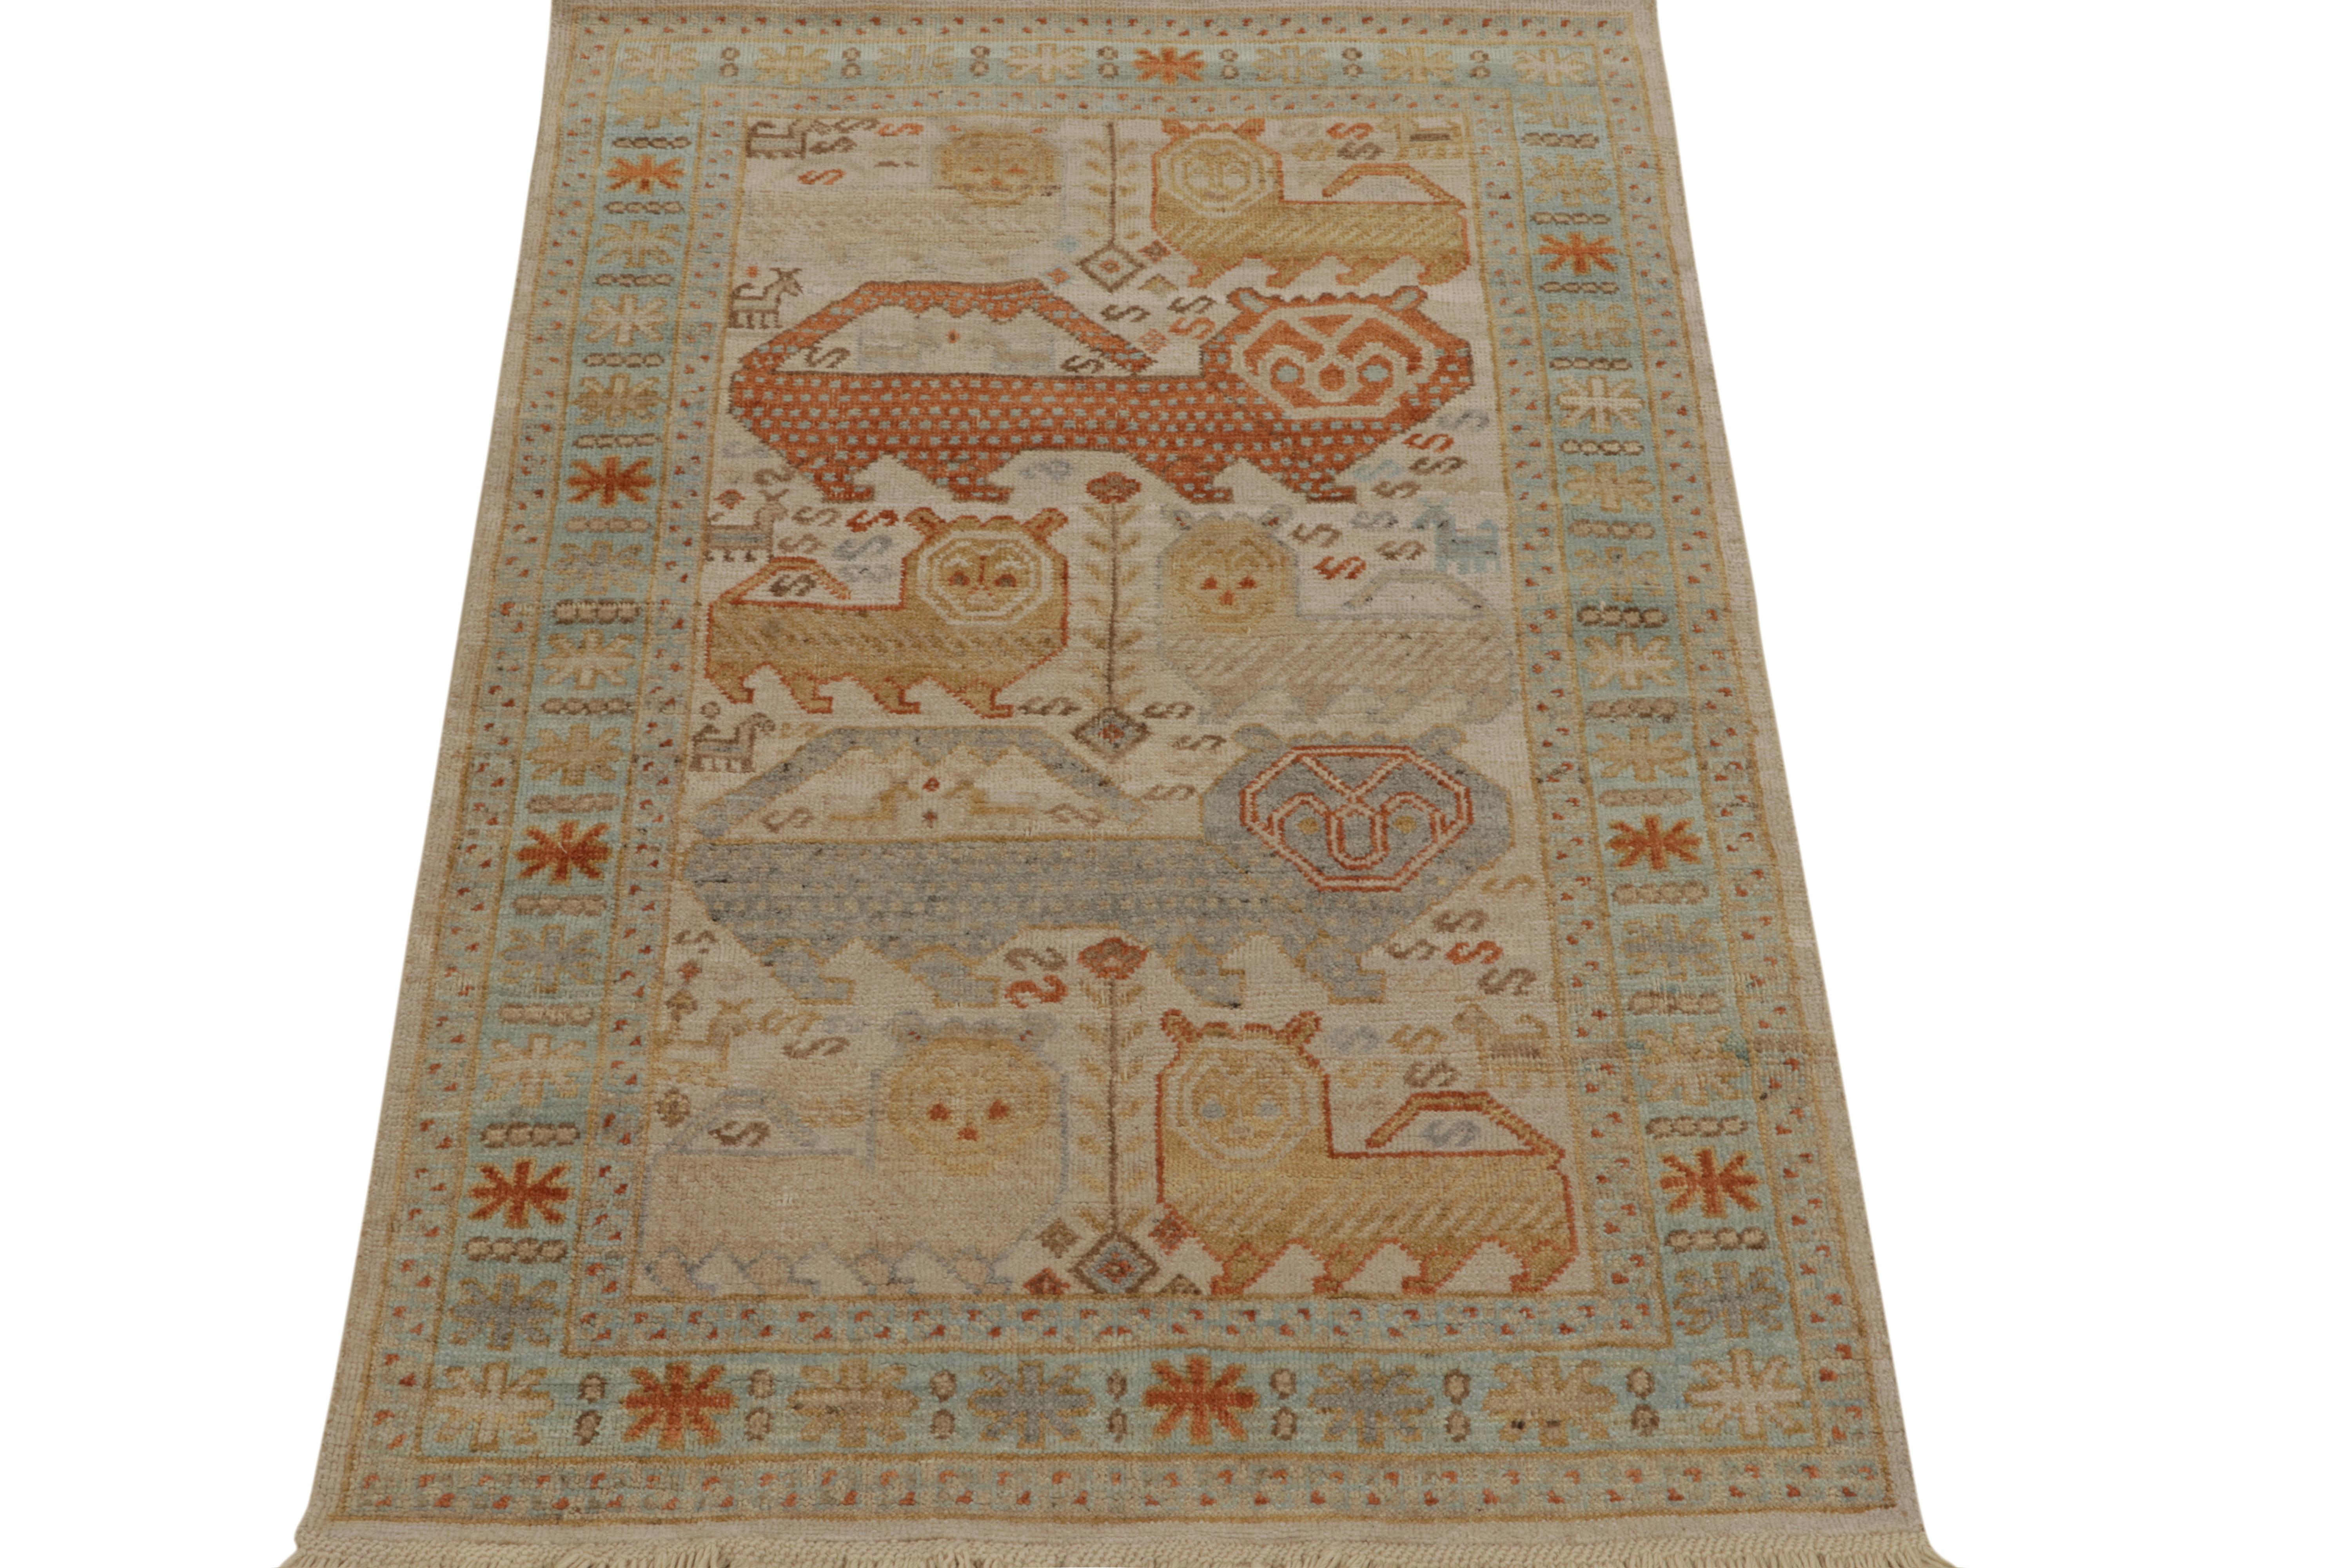 Indian Rug & Kilim’s Tribal Style Runner in Beige-Brown, Blue and Red Pictorials For Sale